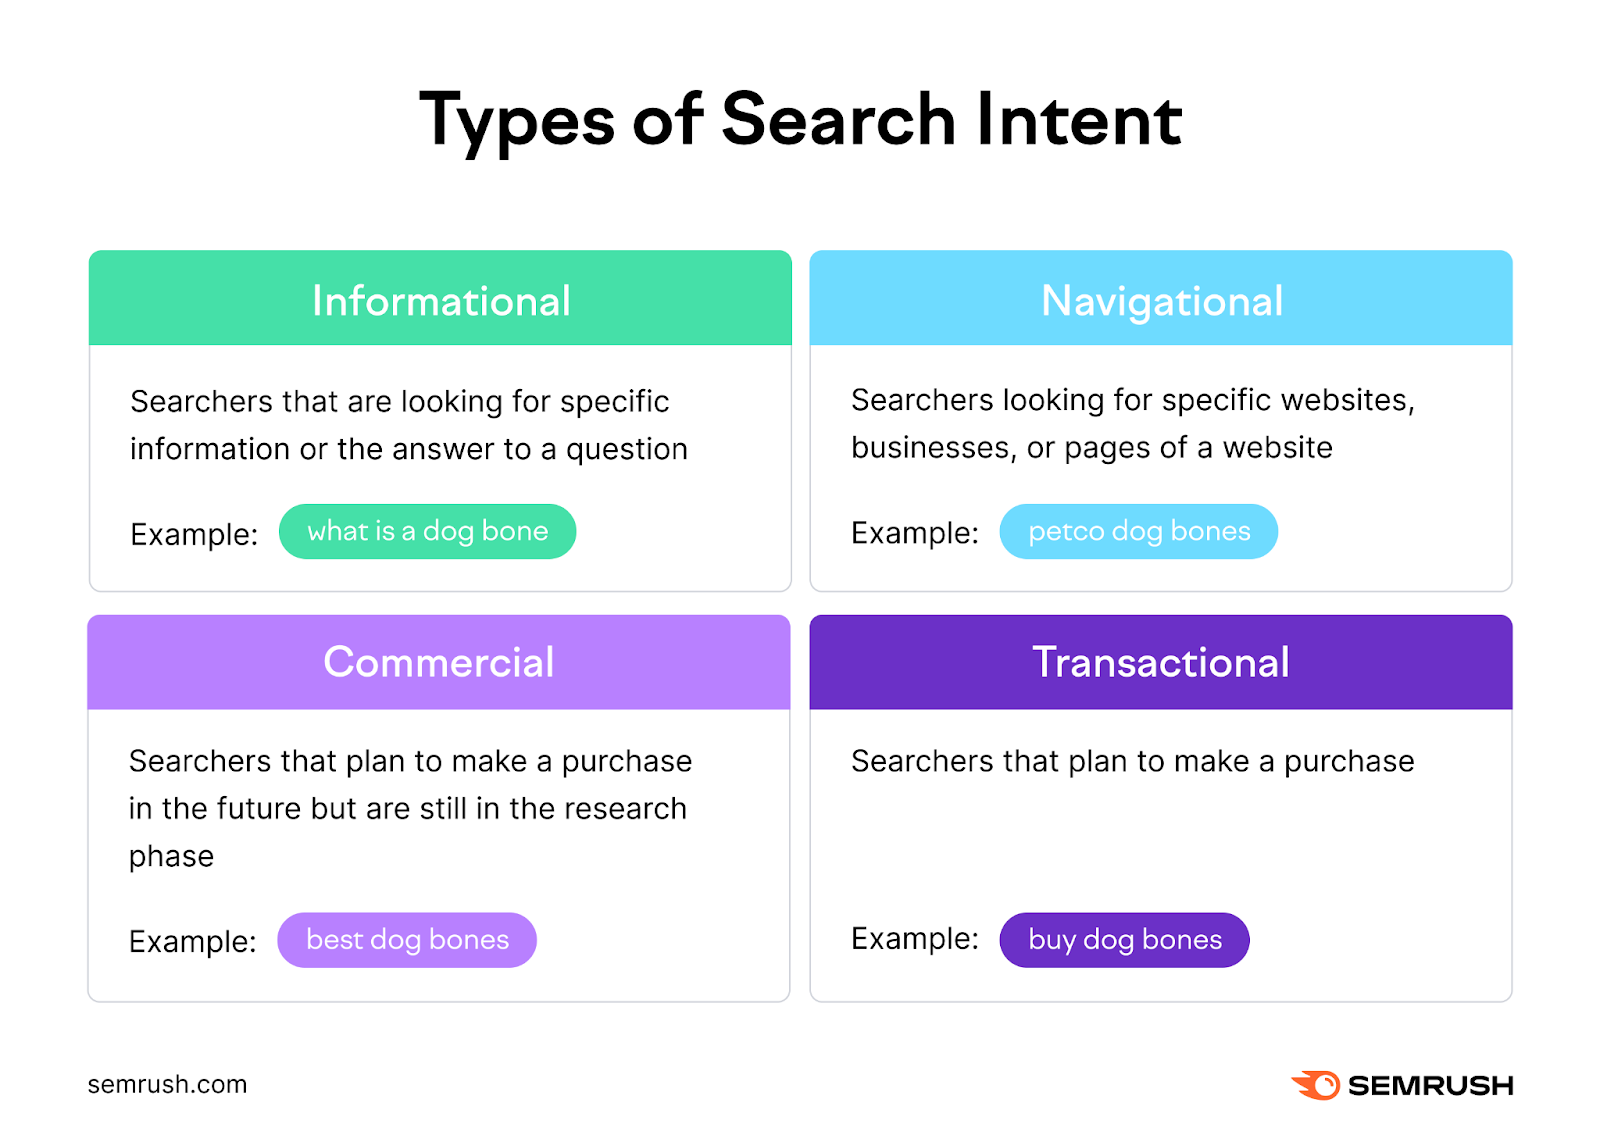 Types of search intent are informational with terms like what is a dog ،, navigational with terms like petco dog ،s, commercial with terms like best dog ،s, and transactional with terms like buy dog ،s.